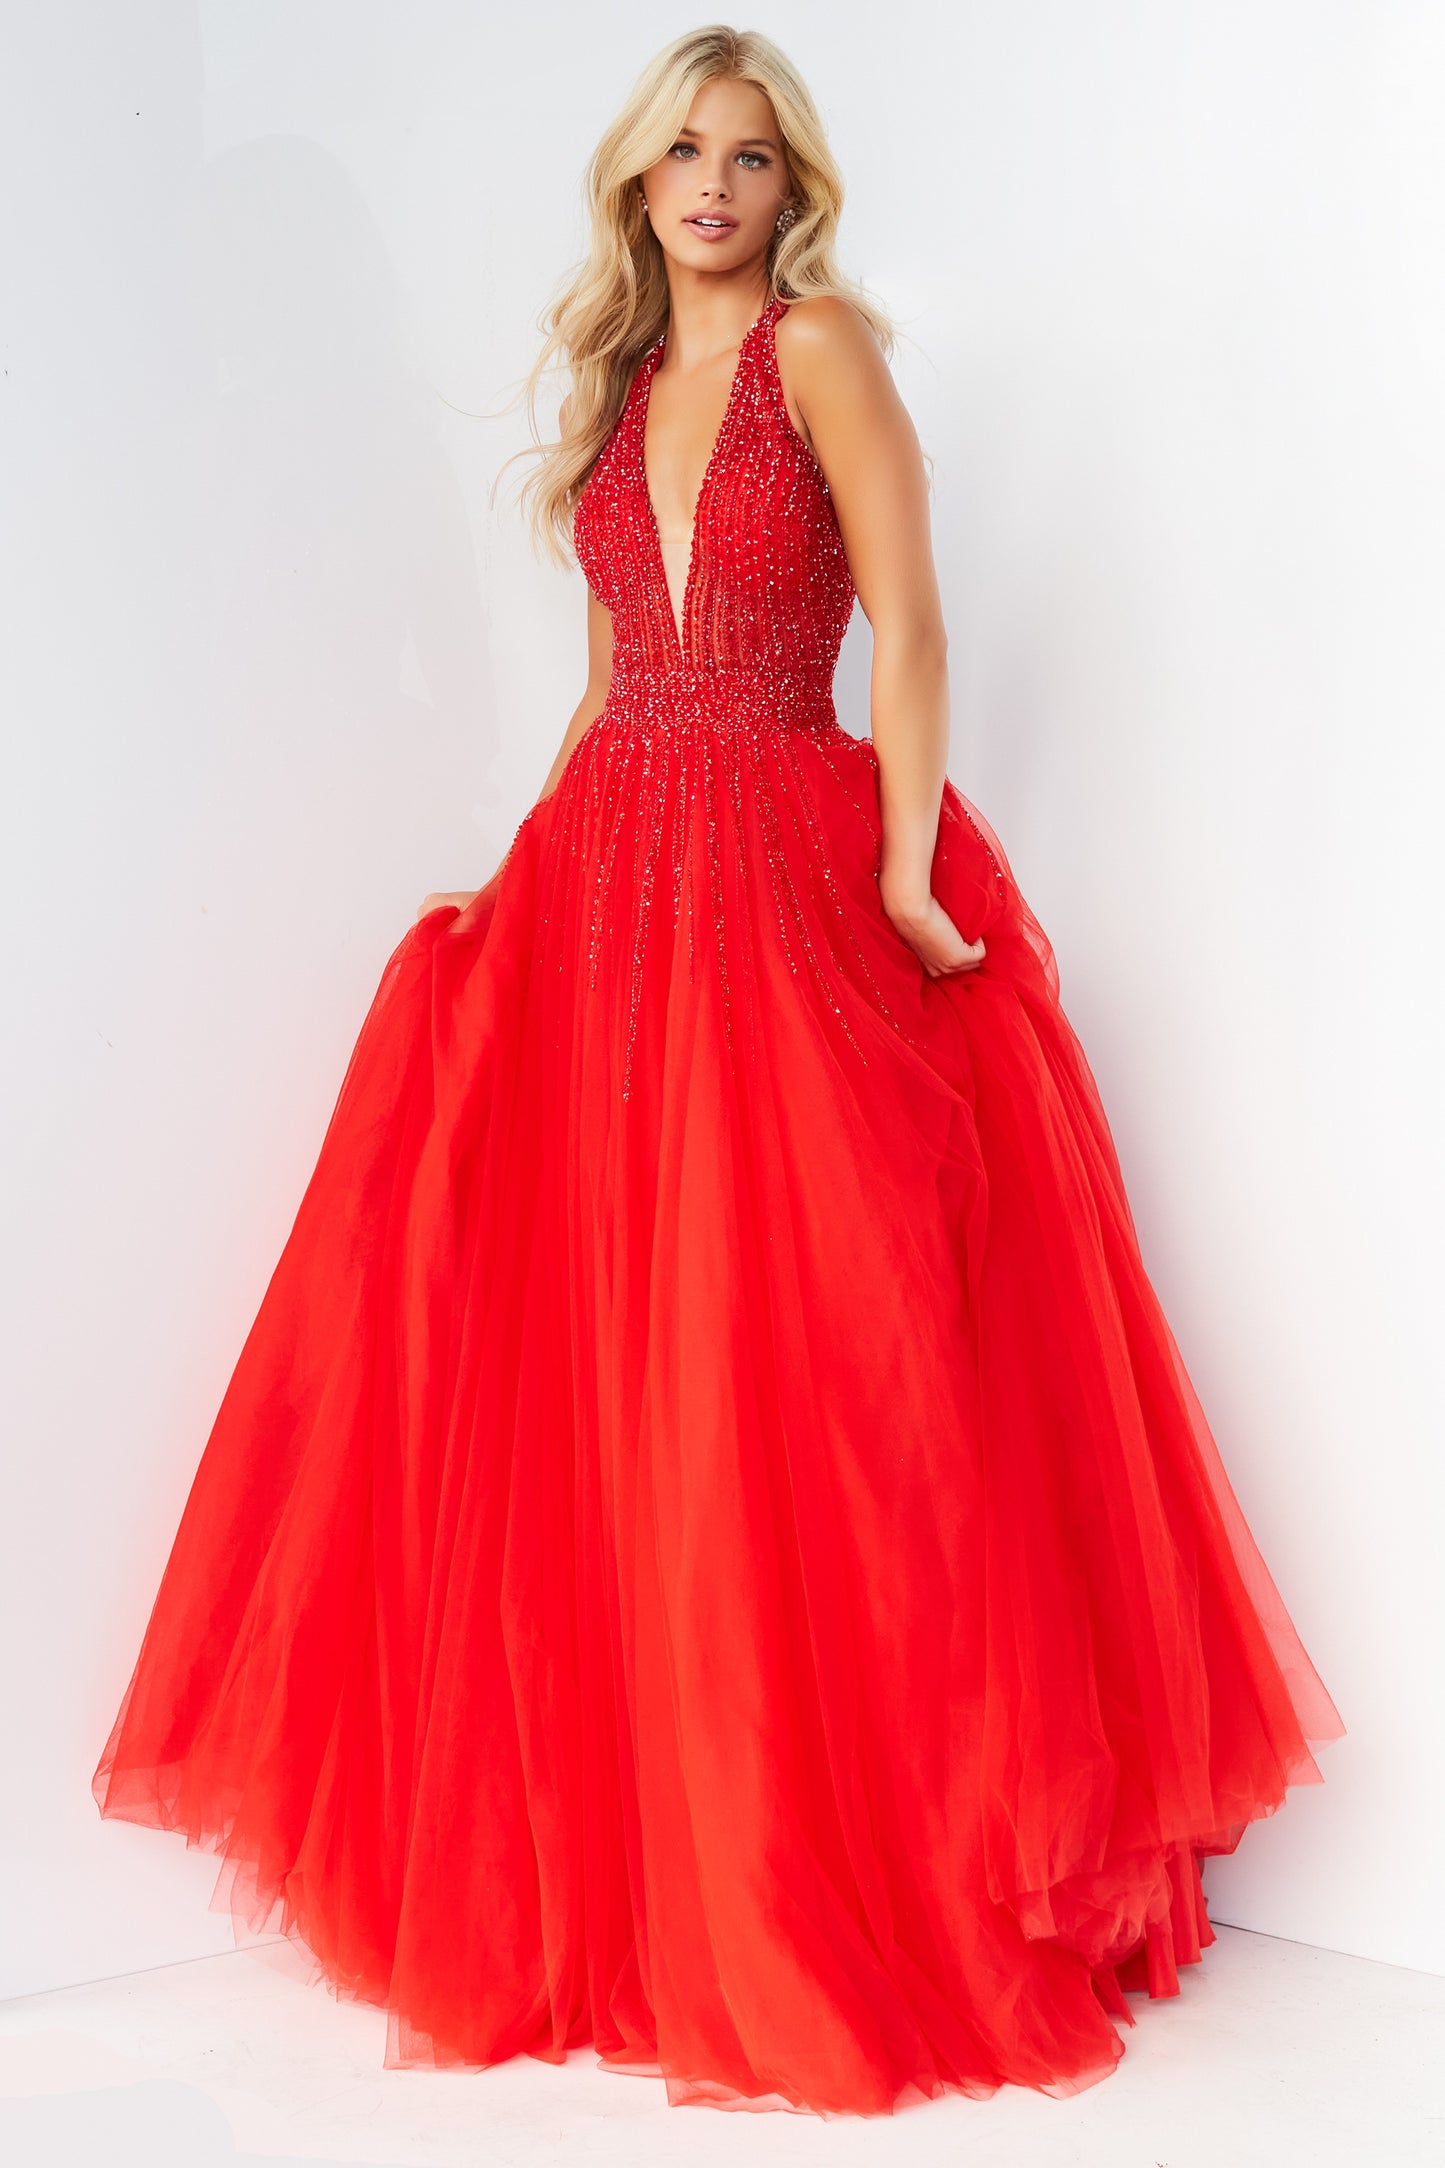 Jovani 06598 Long  Ballgown Prom Pageant Gown V Neck Dress Halter Formal A Line  Available Size- 00-24  Available Color- Red, Black, Ivory